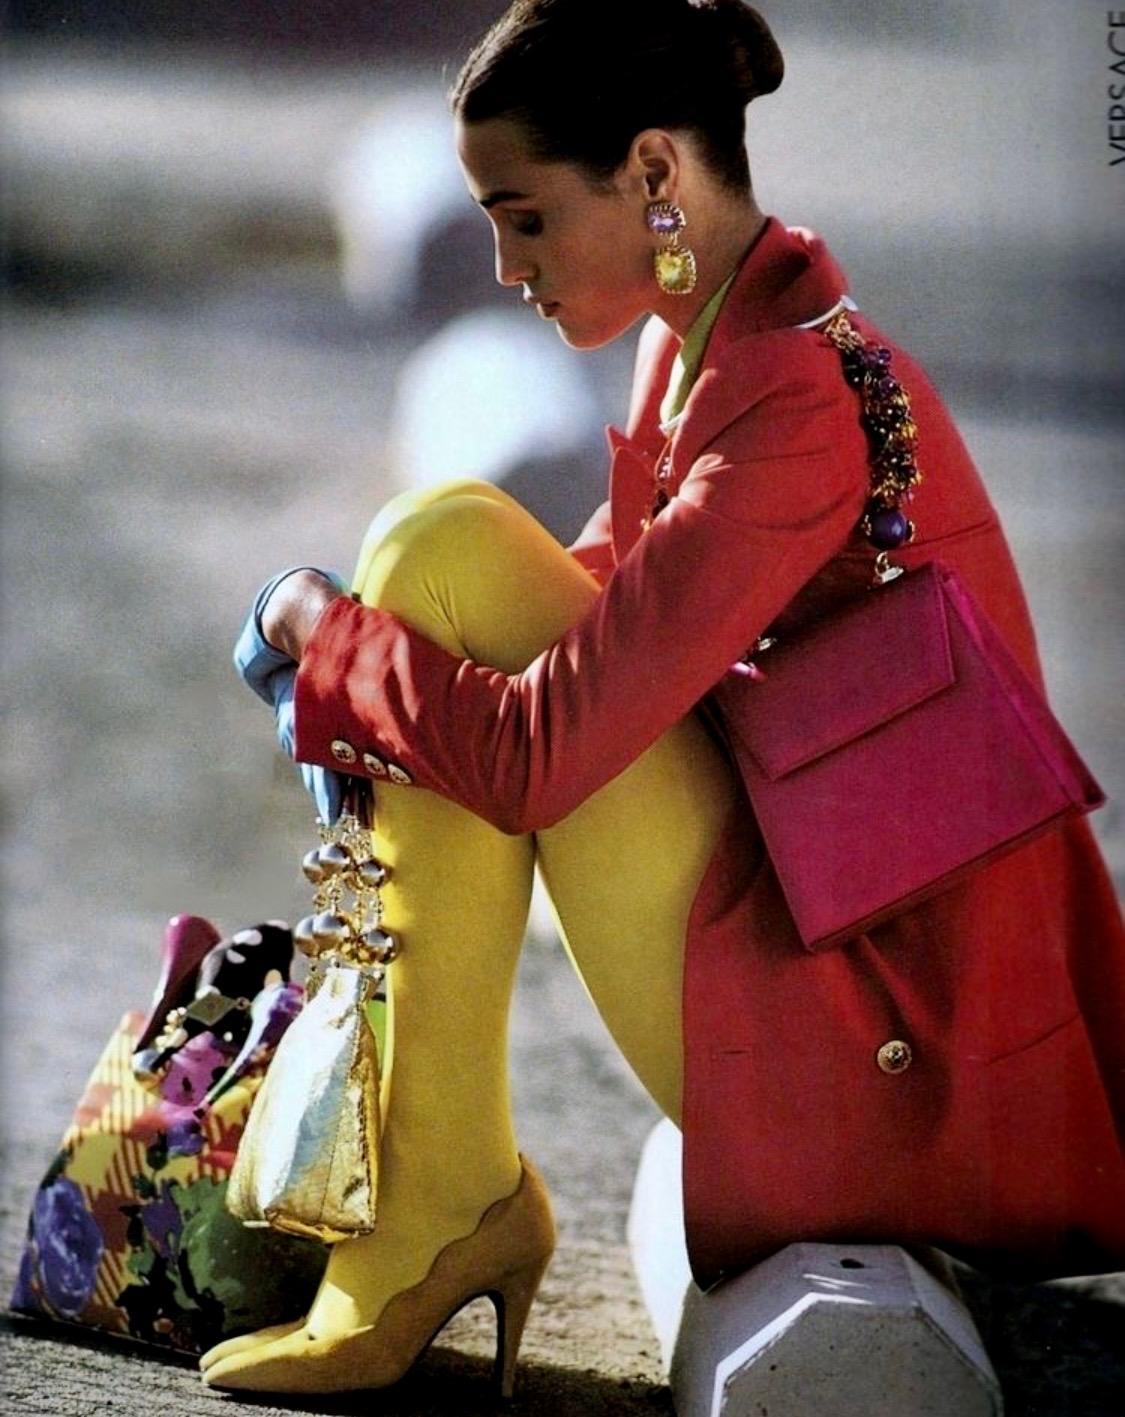 Presenting a Fuschia silk satin Gianni Versace top handle bag designed by Gianni Versace. From the Spring/Summer 1991 collection, a version of this bag was highlighted in an editorial shoot of the April 1991 issue of Elle Sweden, photographed by